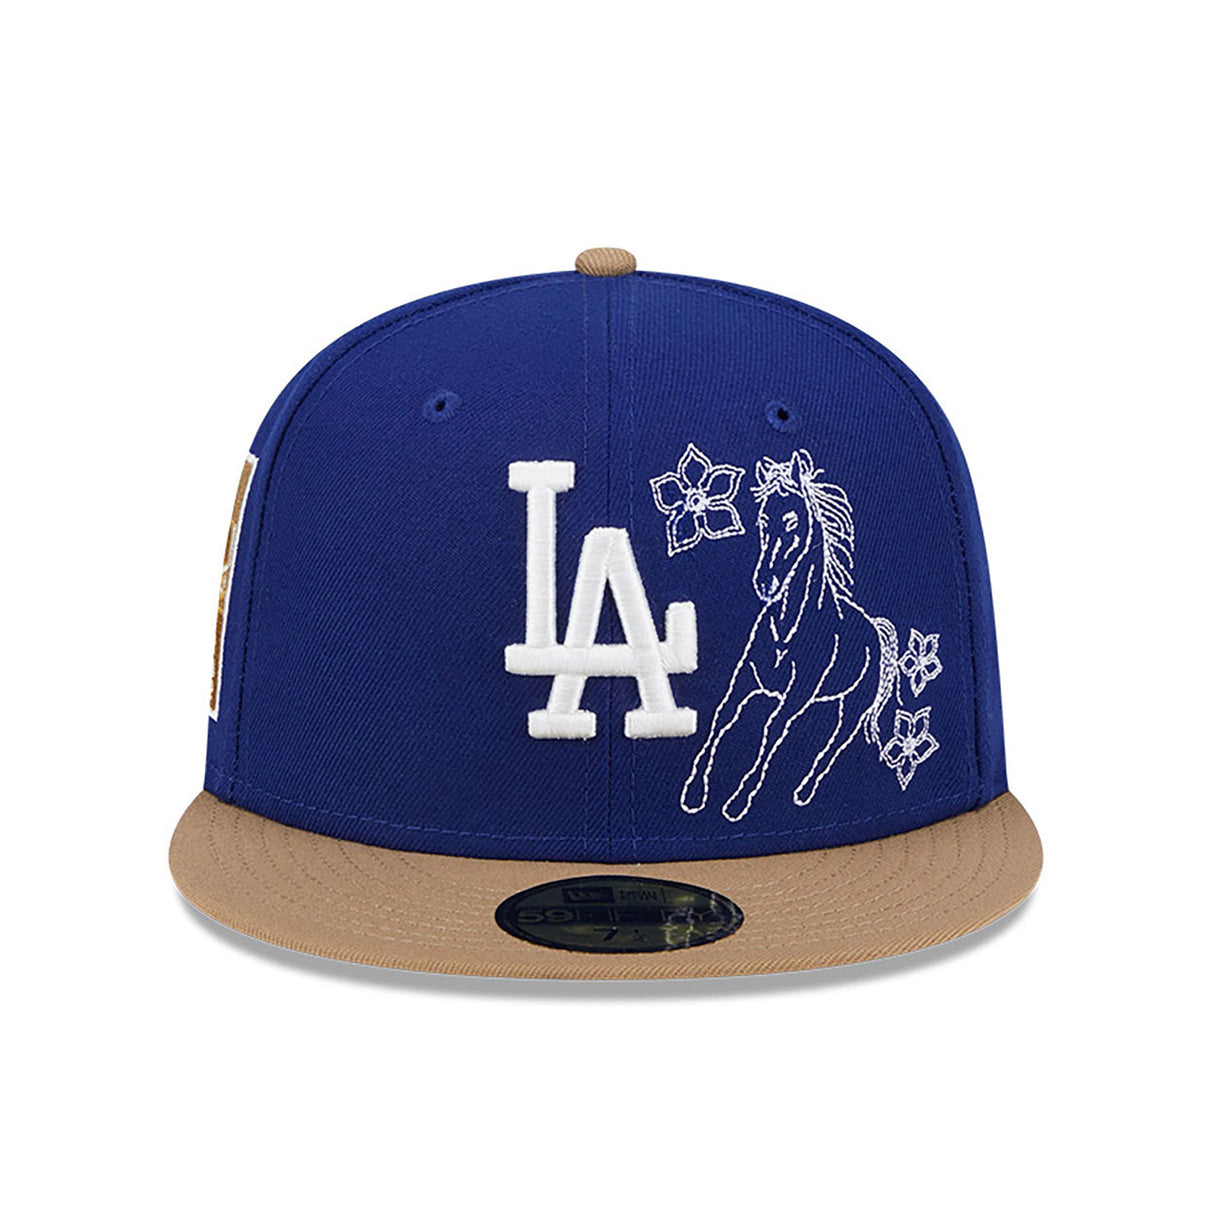 New Era Los Angeles Dodgers Western Khaki Blue & Tan 59Fifty Fitted Hat